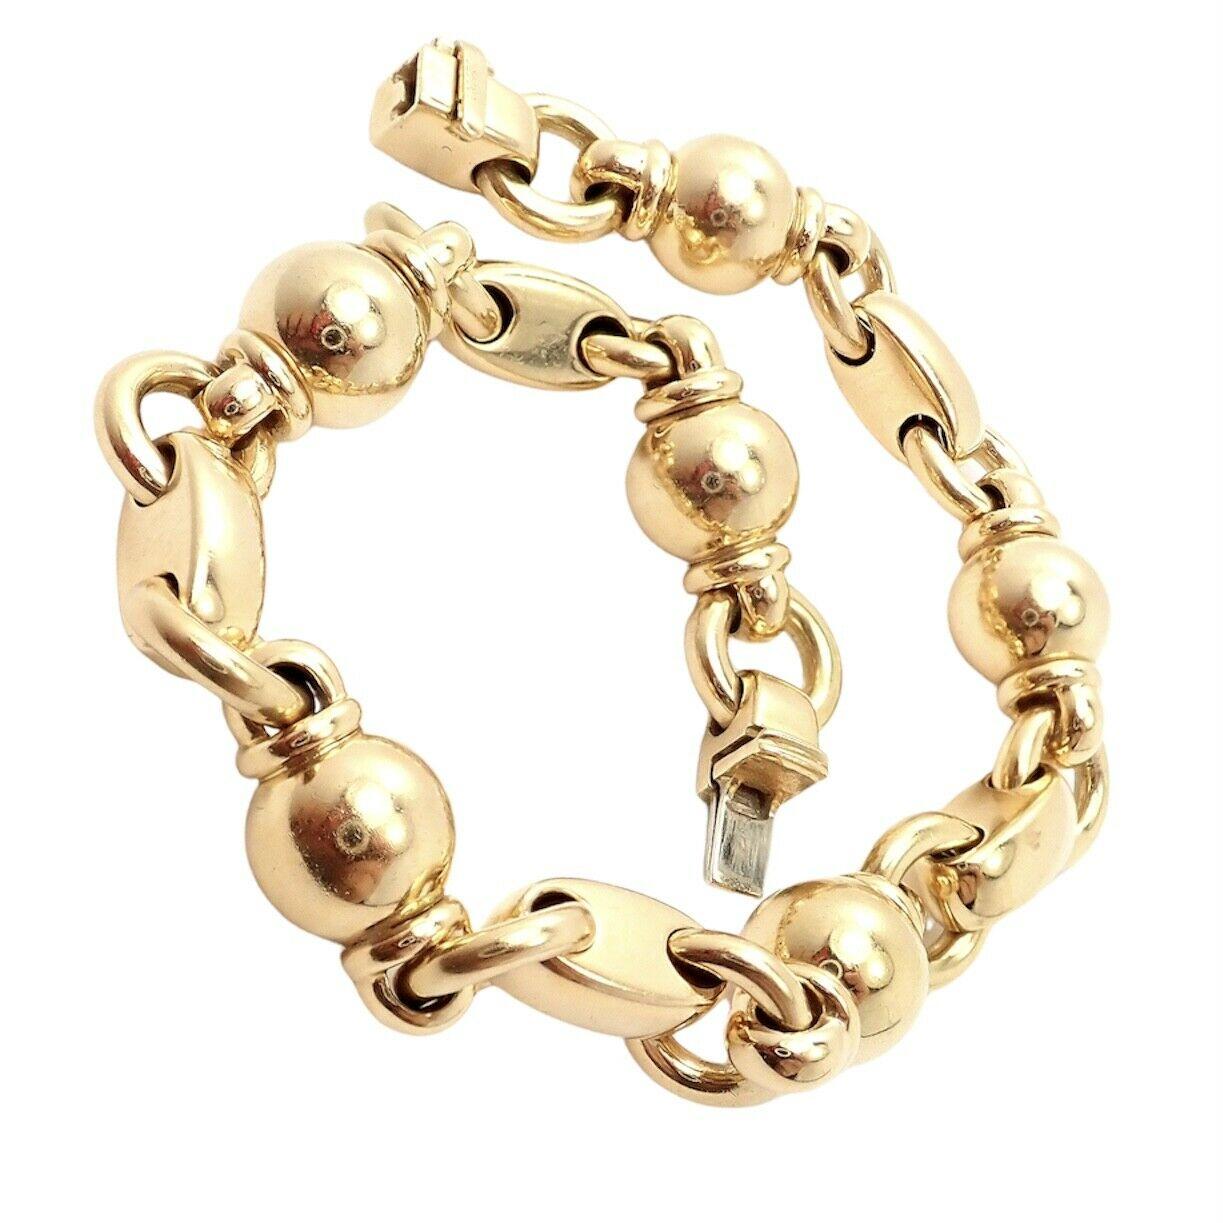 18k Yellow Gold Vintage Classic Link Bracelet by Chanel.
Details: 
Length: 7